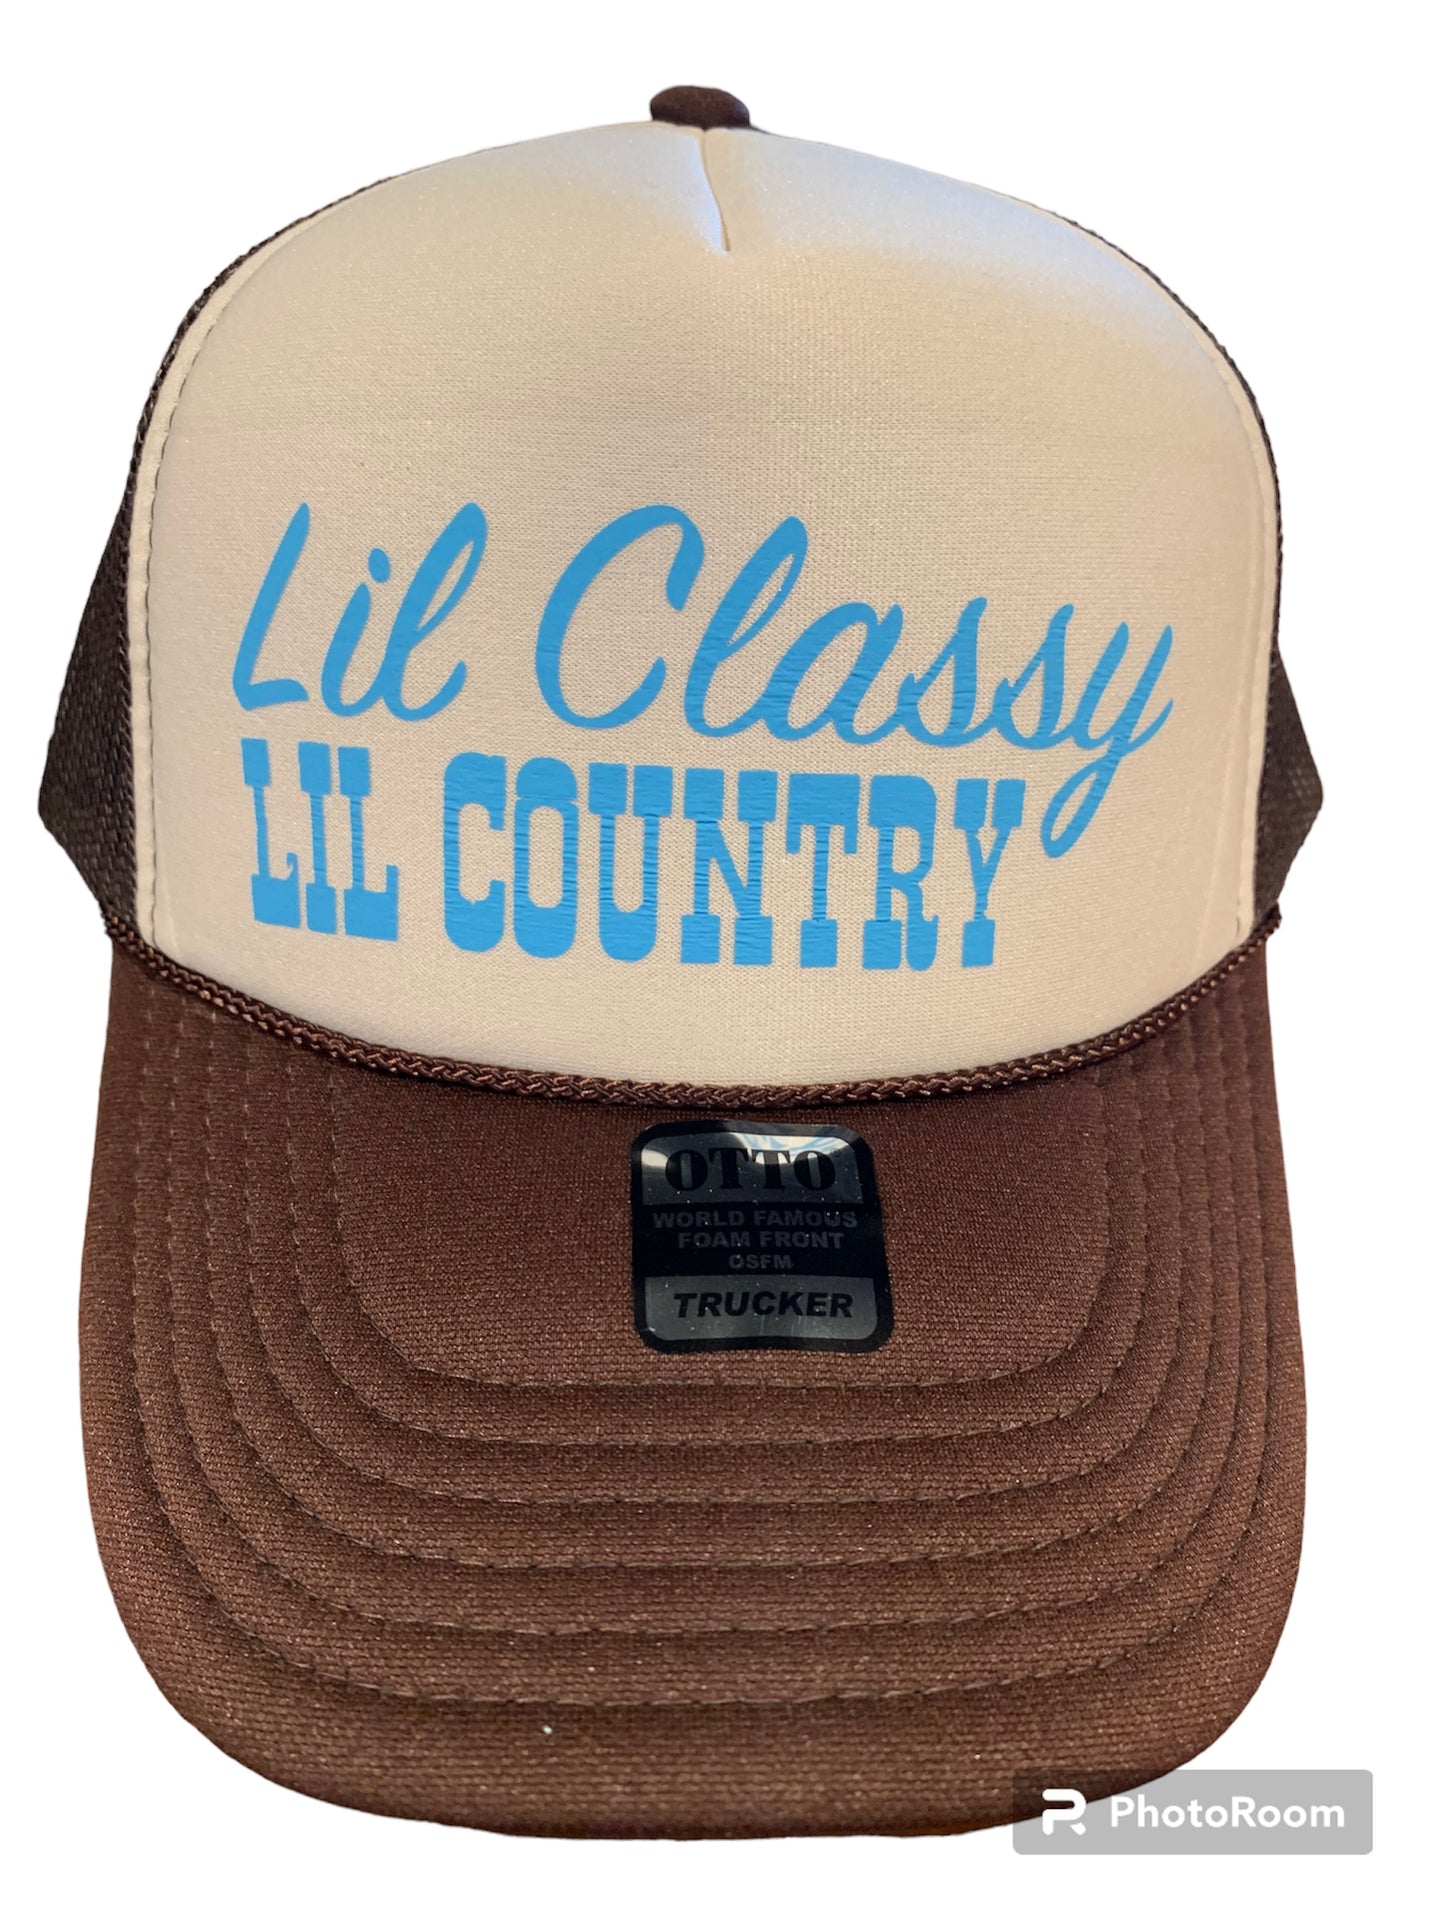 Lil Classy, Lil Country Trucker Hat